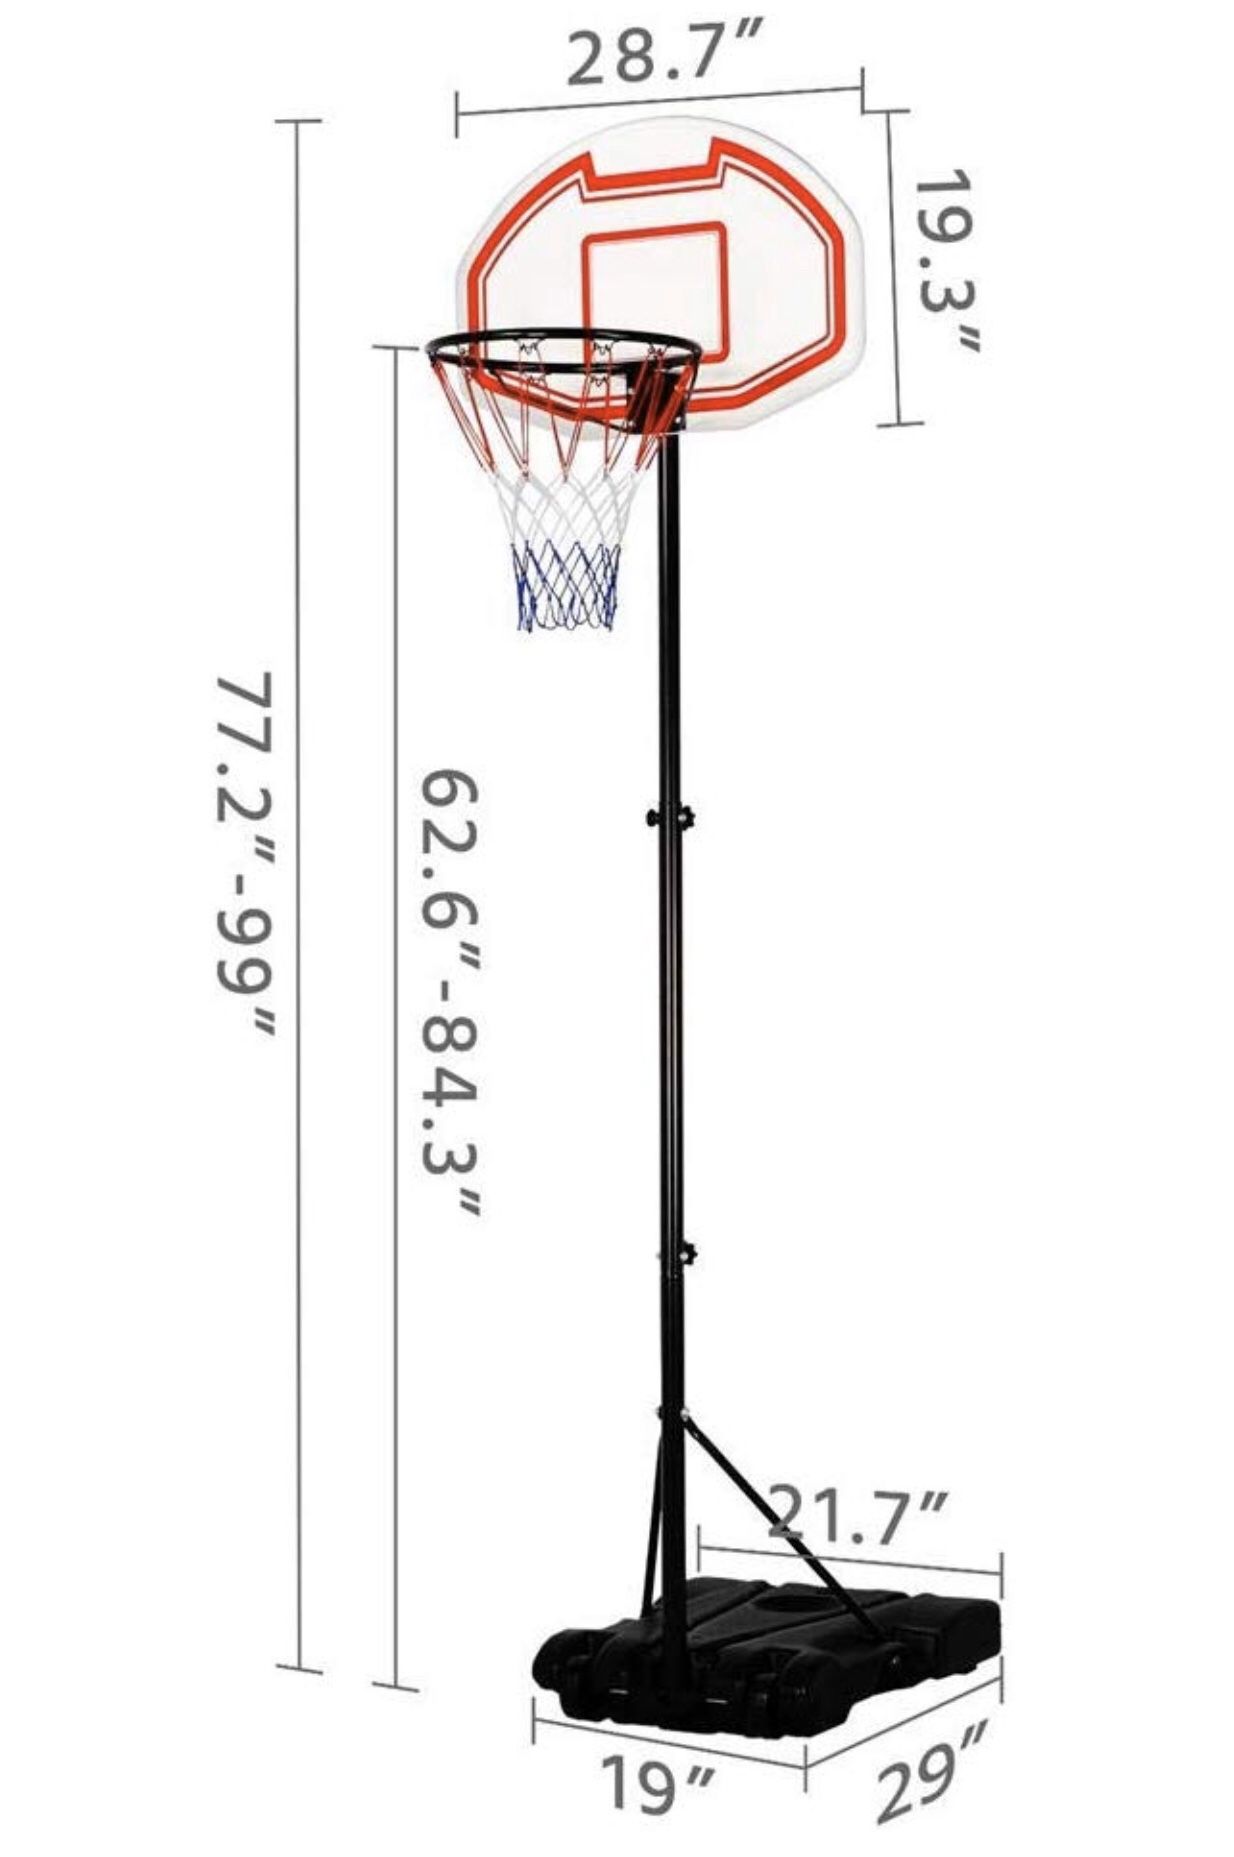 Yaheetech 3.8 Yaheetech Portable Basketball Hoop System Height Adjustable Basketball Stand for Kids Indoor/Outdoor W/Wheels, 29 Inch Backboard